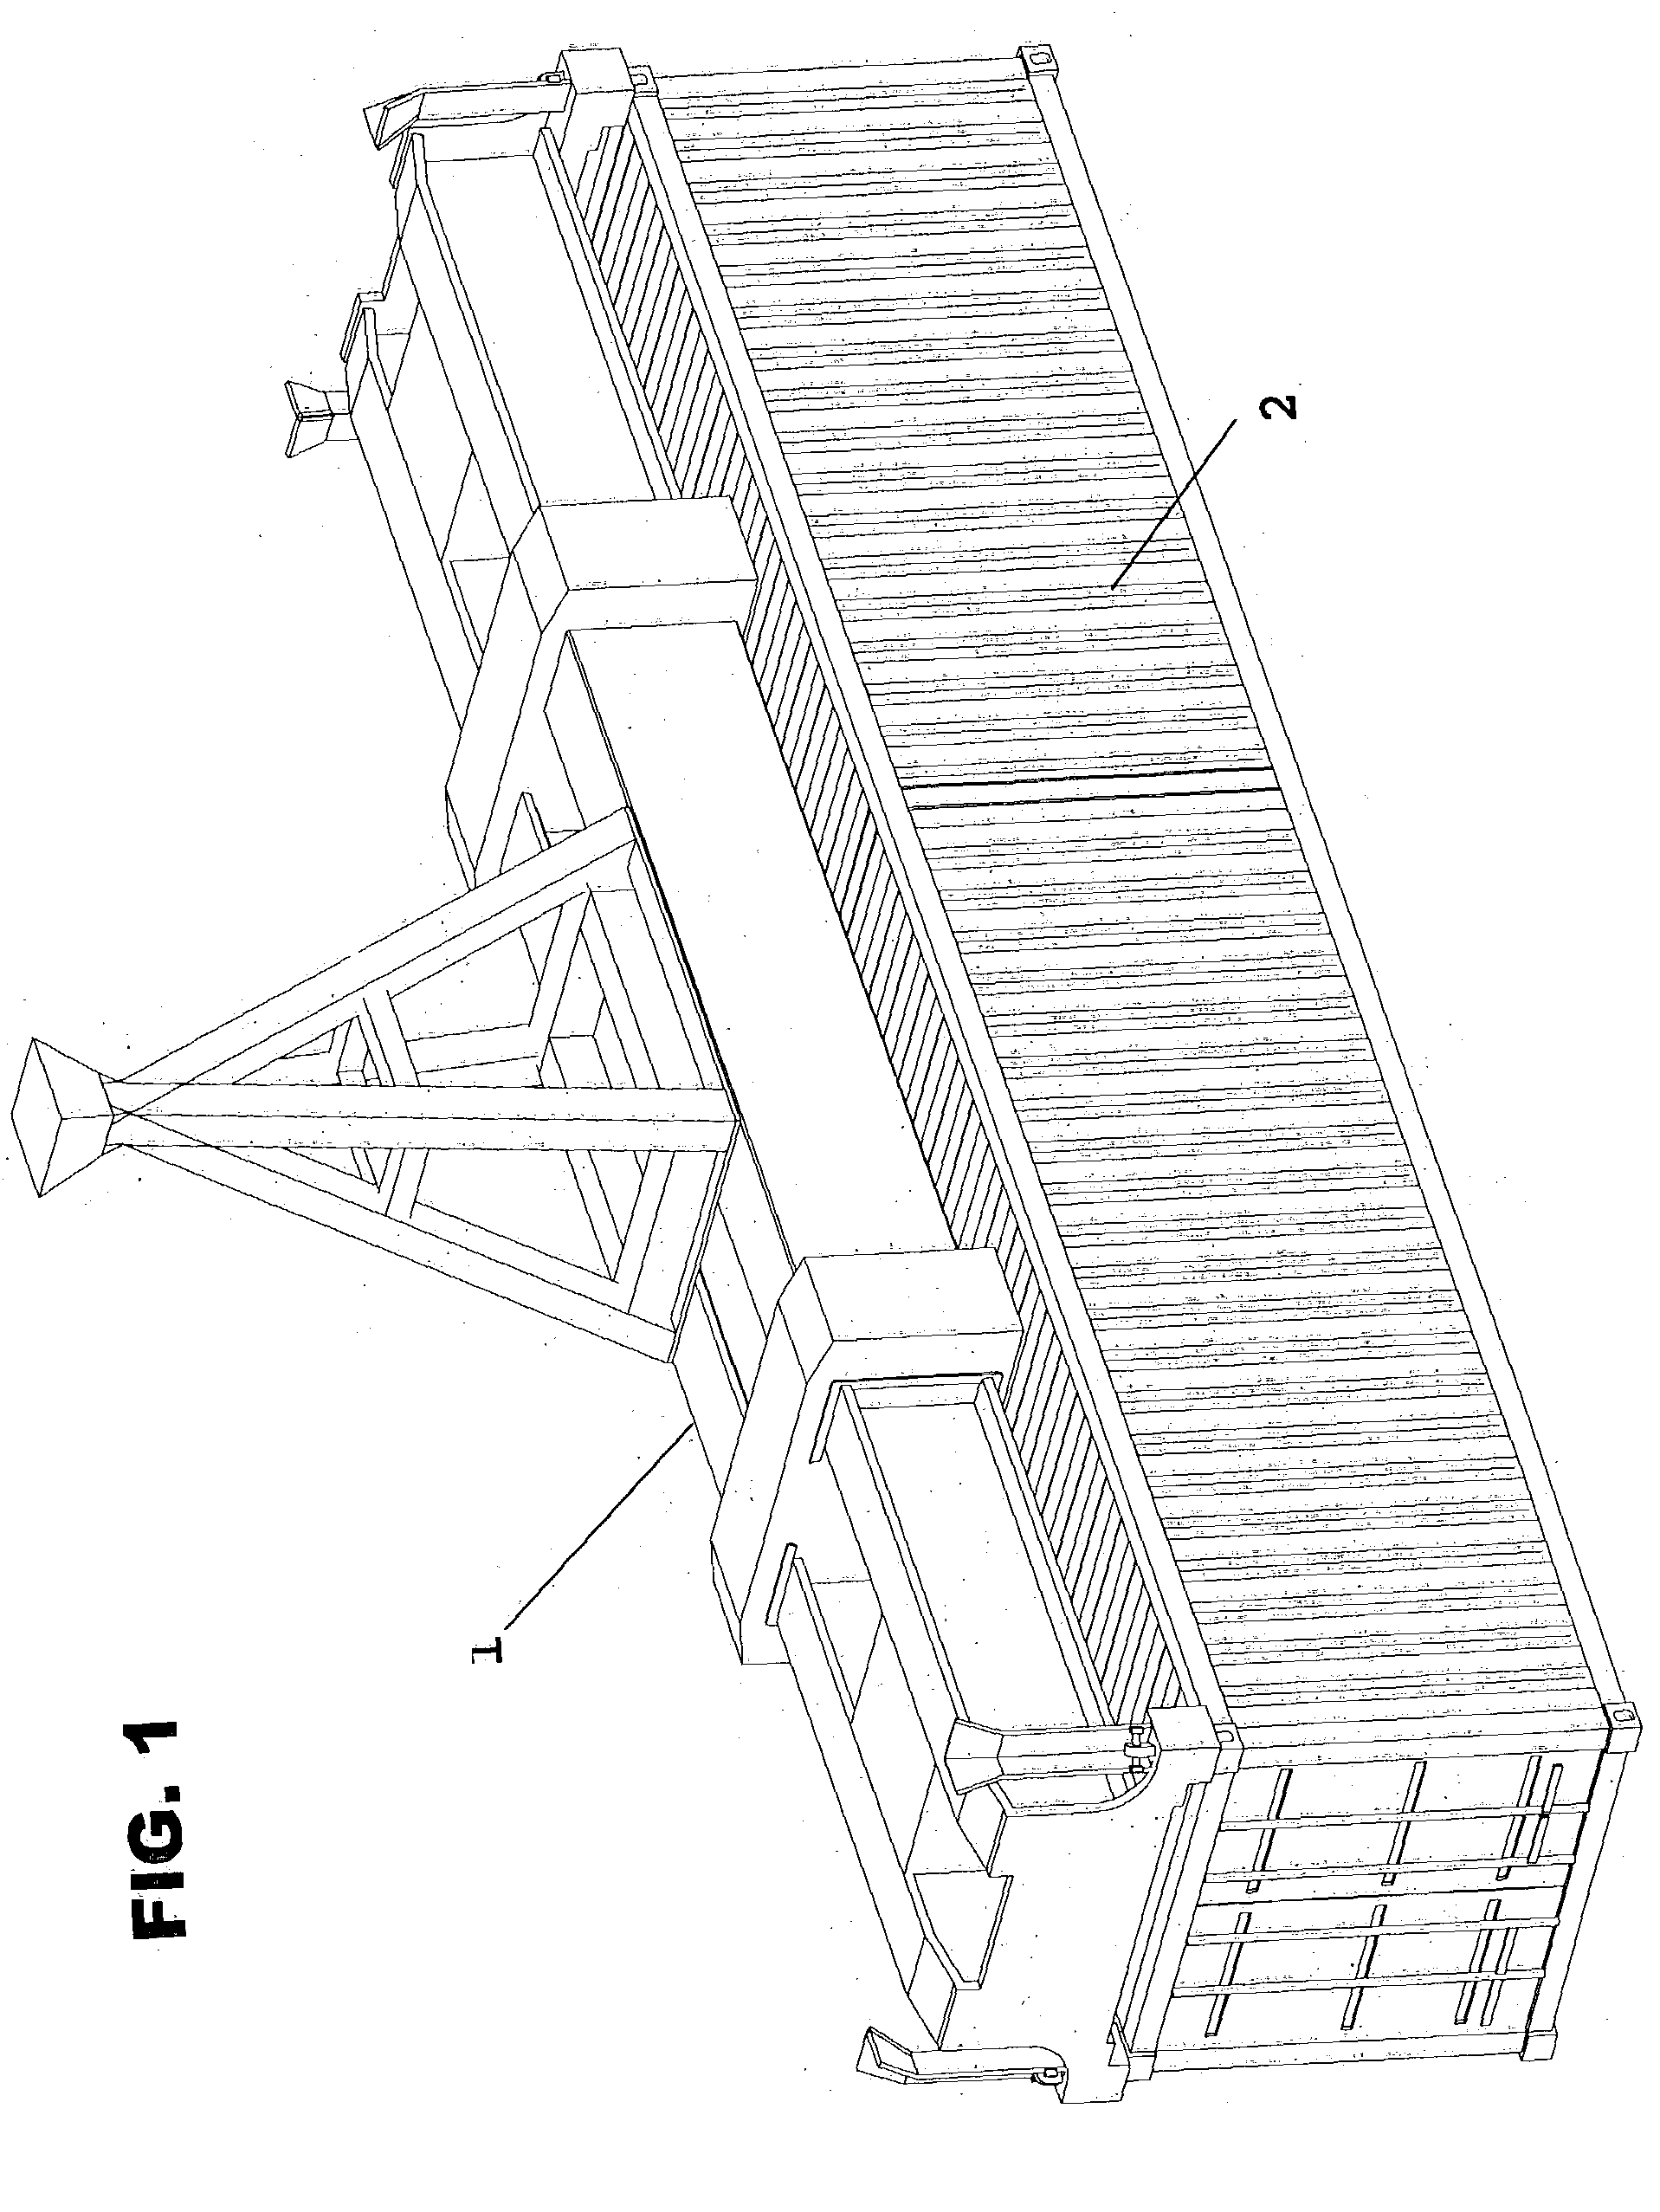 Apparatus and method for detecting radiation or radiation shielding in containers